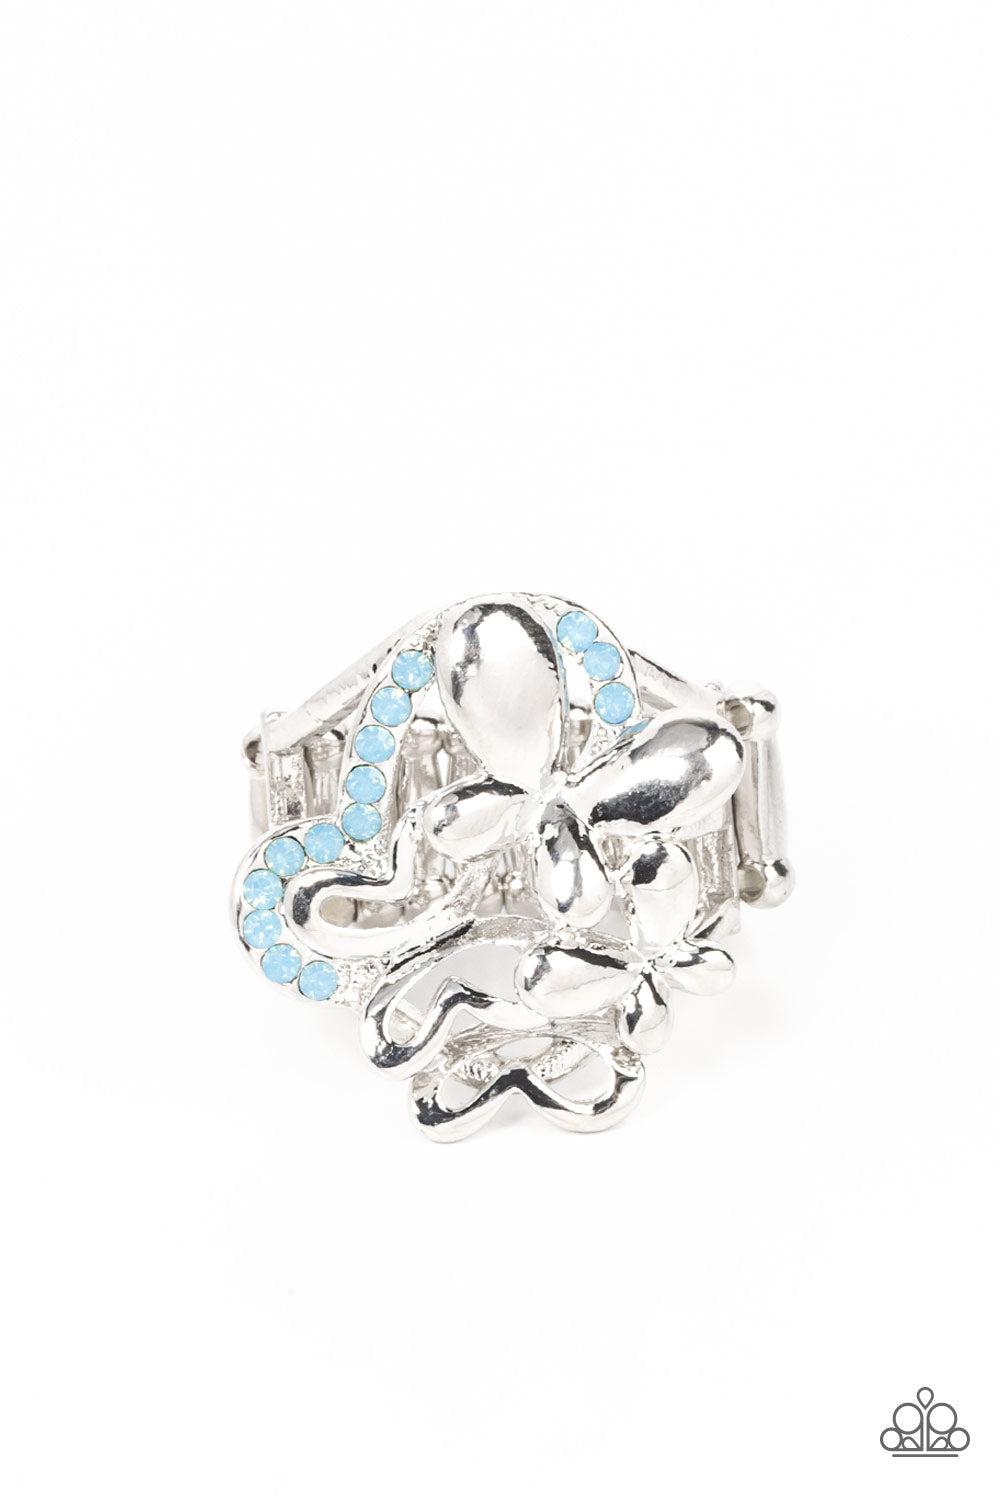 Fluttering Flashback Blue Butterfly Ring - Paparazzi Accessories- lightbox - CarasShop.com - $5 Jewelry by Cara Jewels